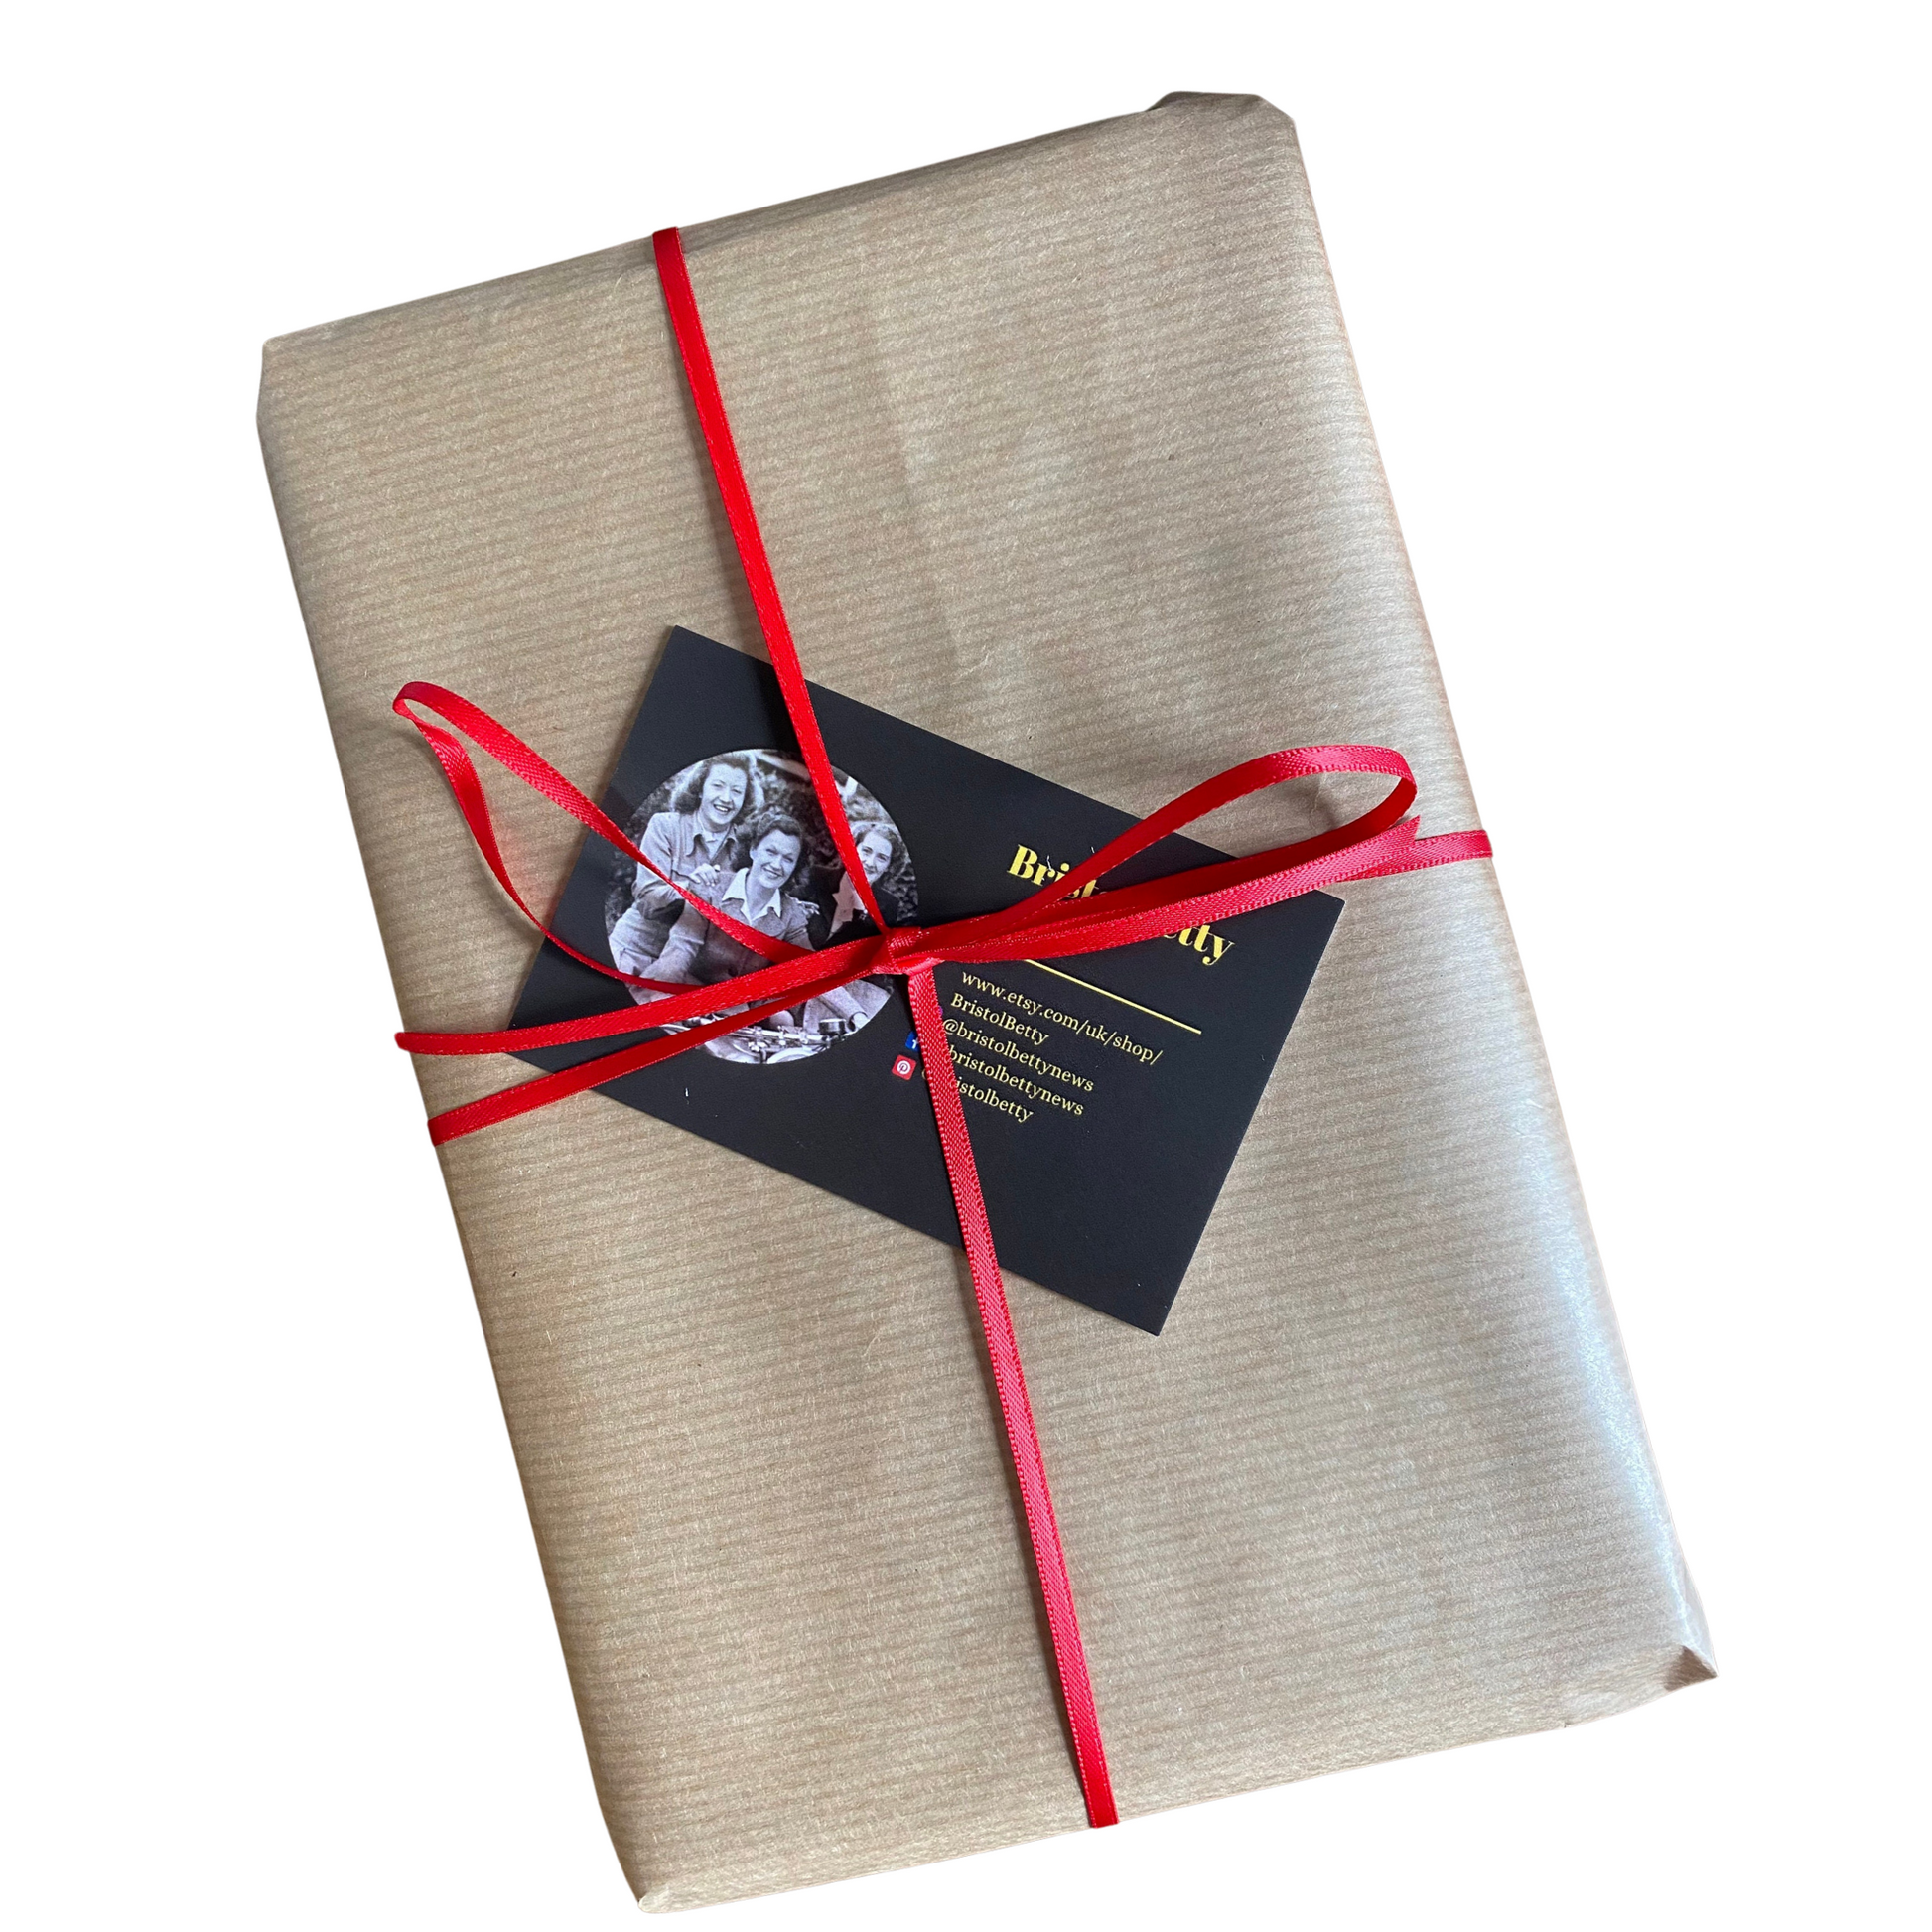 All books are wrapped in Kraft paper and ribbon 